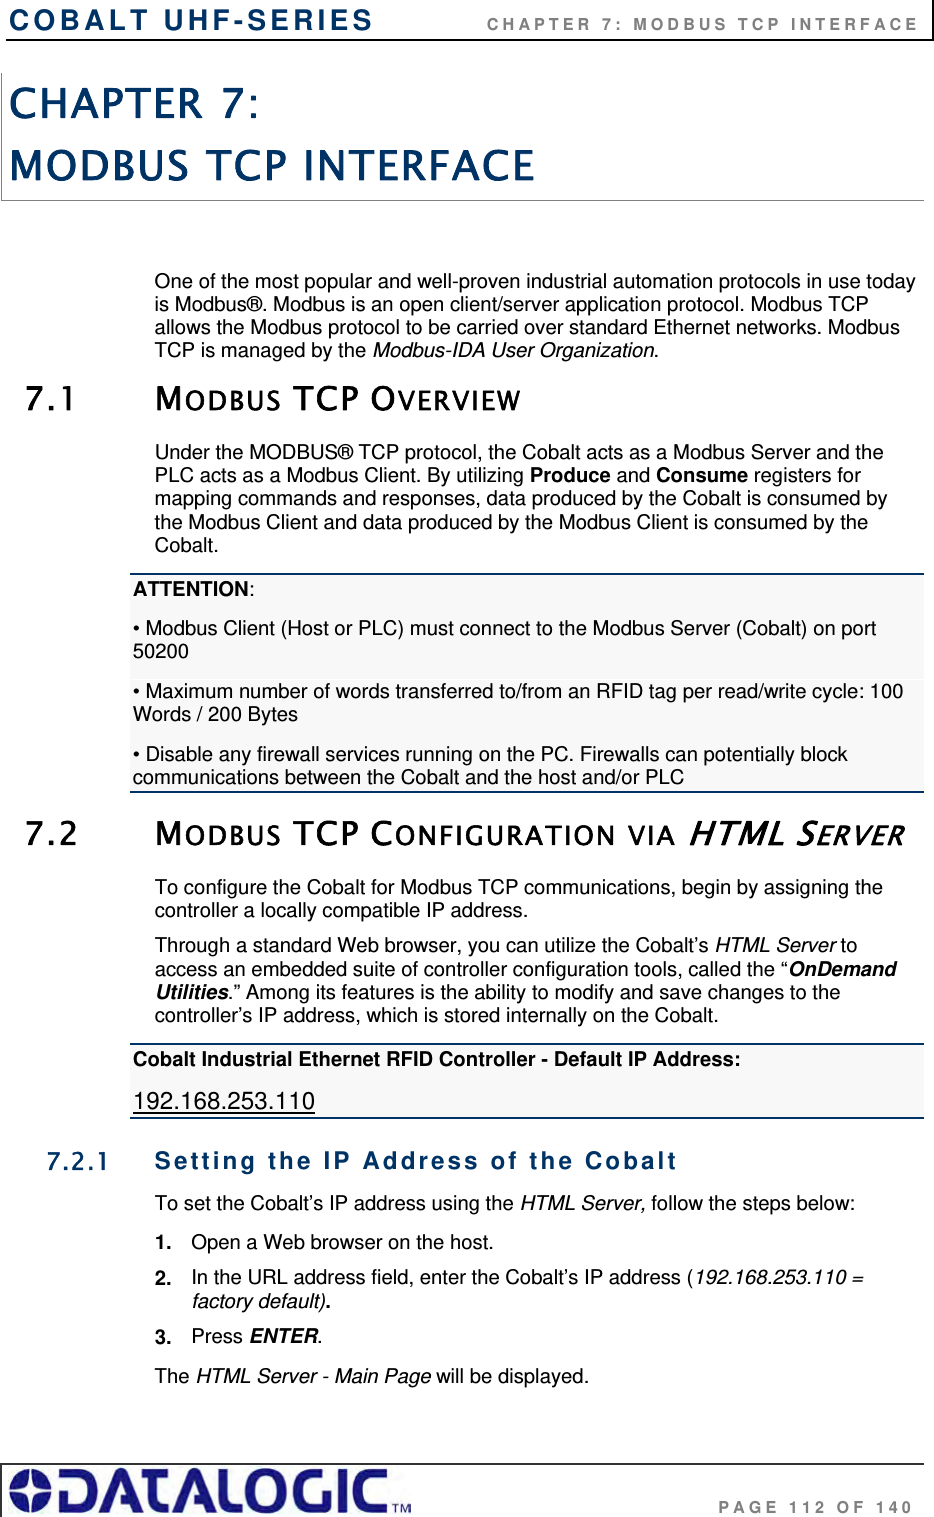 COBALT UHF-SERIES             CHAPTER 7: MODBUS TCP INTERFACE                                     PAGE 112 OF 140 CHAPTER 7:  MODBUS TCP INTERFACE  One of the most popular and well-proven industrial automation protocols in use today is Modbus®. Modbus is an open client/server application protocol. Modbus TCP allows the Modbus protocol to be carried over standard Ethernet networks. Modbus TCP is managed by the Modbus-IDA User Organization.  7.1 MODBUS TCP OVERVIEW Under the MODBUS® TCP protocol, the Cobalt acts as a Modbus Server and the PLC acts as a Modbus Client. By utilizing Produce and Consume registers for mapping commands and responses, data produced by the Cobalt is consumed by the Modbus Client and data produced by the Modbus Client is consumed by the Cobalt. ATTENTION: • Modbus Client (Host or PLC) must connect to the Modbus Server (Cobalt) on port 50200 • Maximum number of words transferred to/from an RFID tag per read/write cycle: 100   Words / 200 Bytes  • Disable any firewall services running on the PC. Firewalls can potentially block communications between the Cobalt and the host and/or PLC 7.2 MODBUS TCP CONFIGURATION VIA HTML SERVER To configure the Cobalt for Modbus TCP communications, begin by assigning the controller a locally compatible IP address.  Through a standard Web browser, you can utilize the Cobalt’s HTML Server to access an embedded suite of controller configuration tools, called the “OnDemand Utilities.” Among its features is the ability to modify and save changes to the controller’s IP address, which is stored internally on the Cobalt.  Cobalt Industrial Ethernet RFID Controller - Default IP Address: 192.168.253.110 7.2.1  Setting the IP Address of the Cobalt  To set the Cobalt’s IP address using the HTML Server, follow the steps below:  1.  Open a Web browser on the host. 2.  In the URL address field, enter the Cobalt’s IP address (192.168.253.110 = factory default). 3.  Press ENTER. The HTML Server - Main Page will be displayed. 